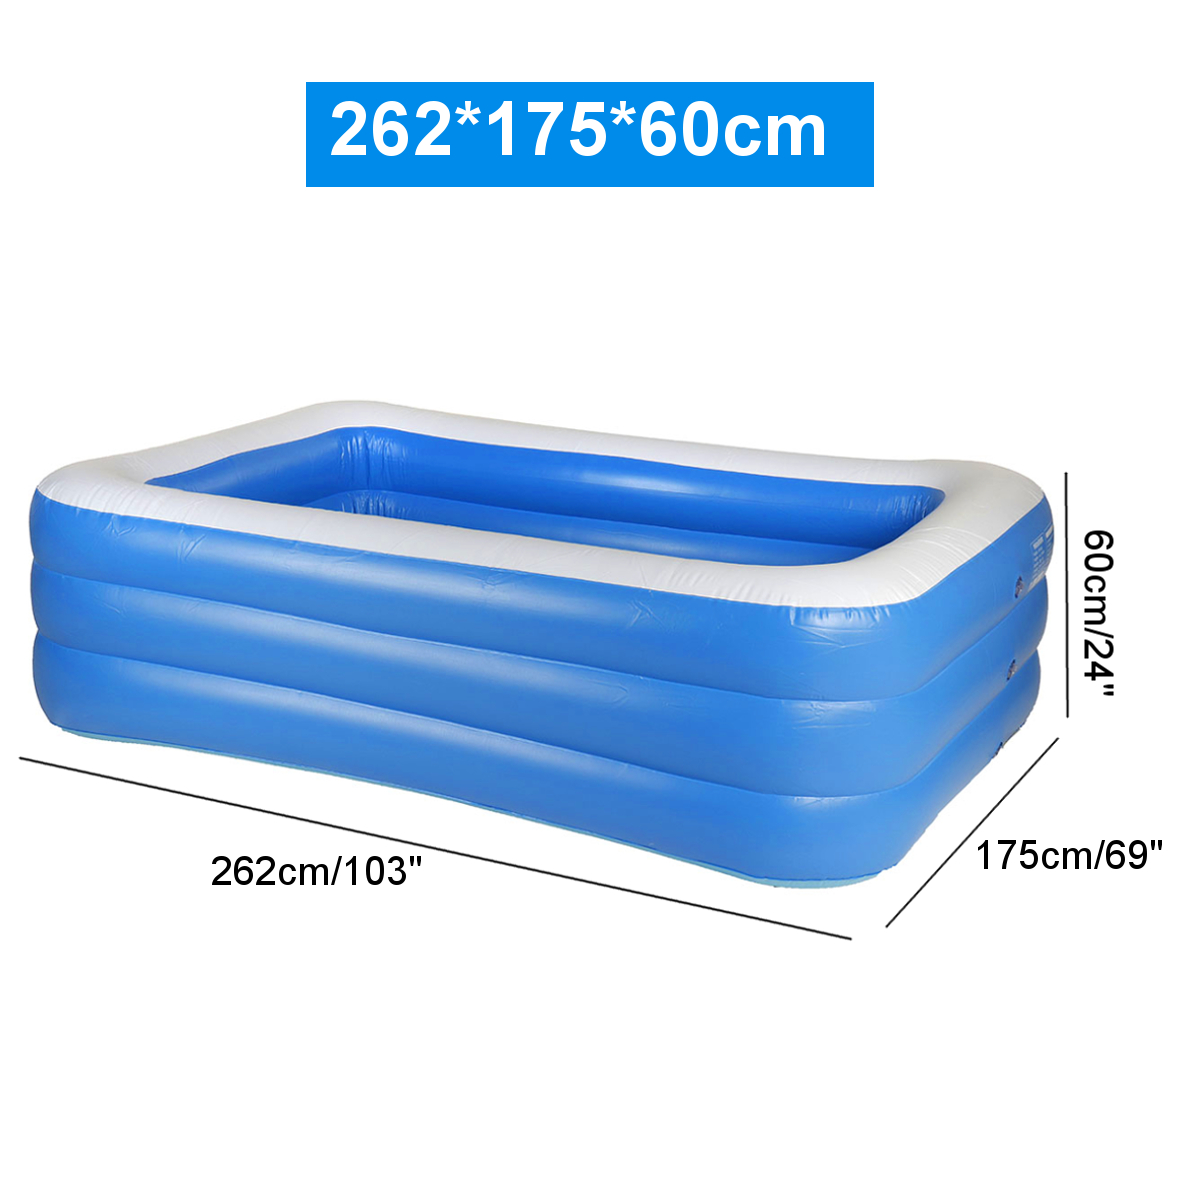 PVC-Thickened-Childrens-Inflatable-Swimming-Pool-Childrens-Pool-Capacity-Large-Bath-Tub-Outdoor-Indo-1842748-11